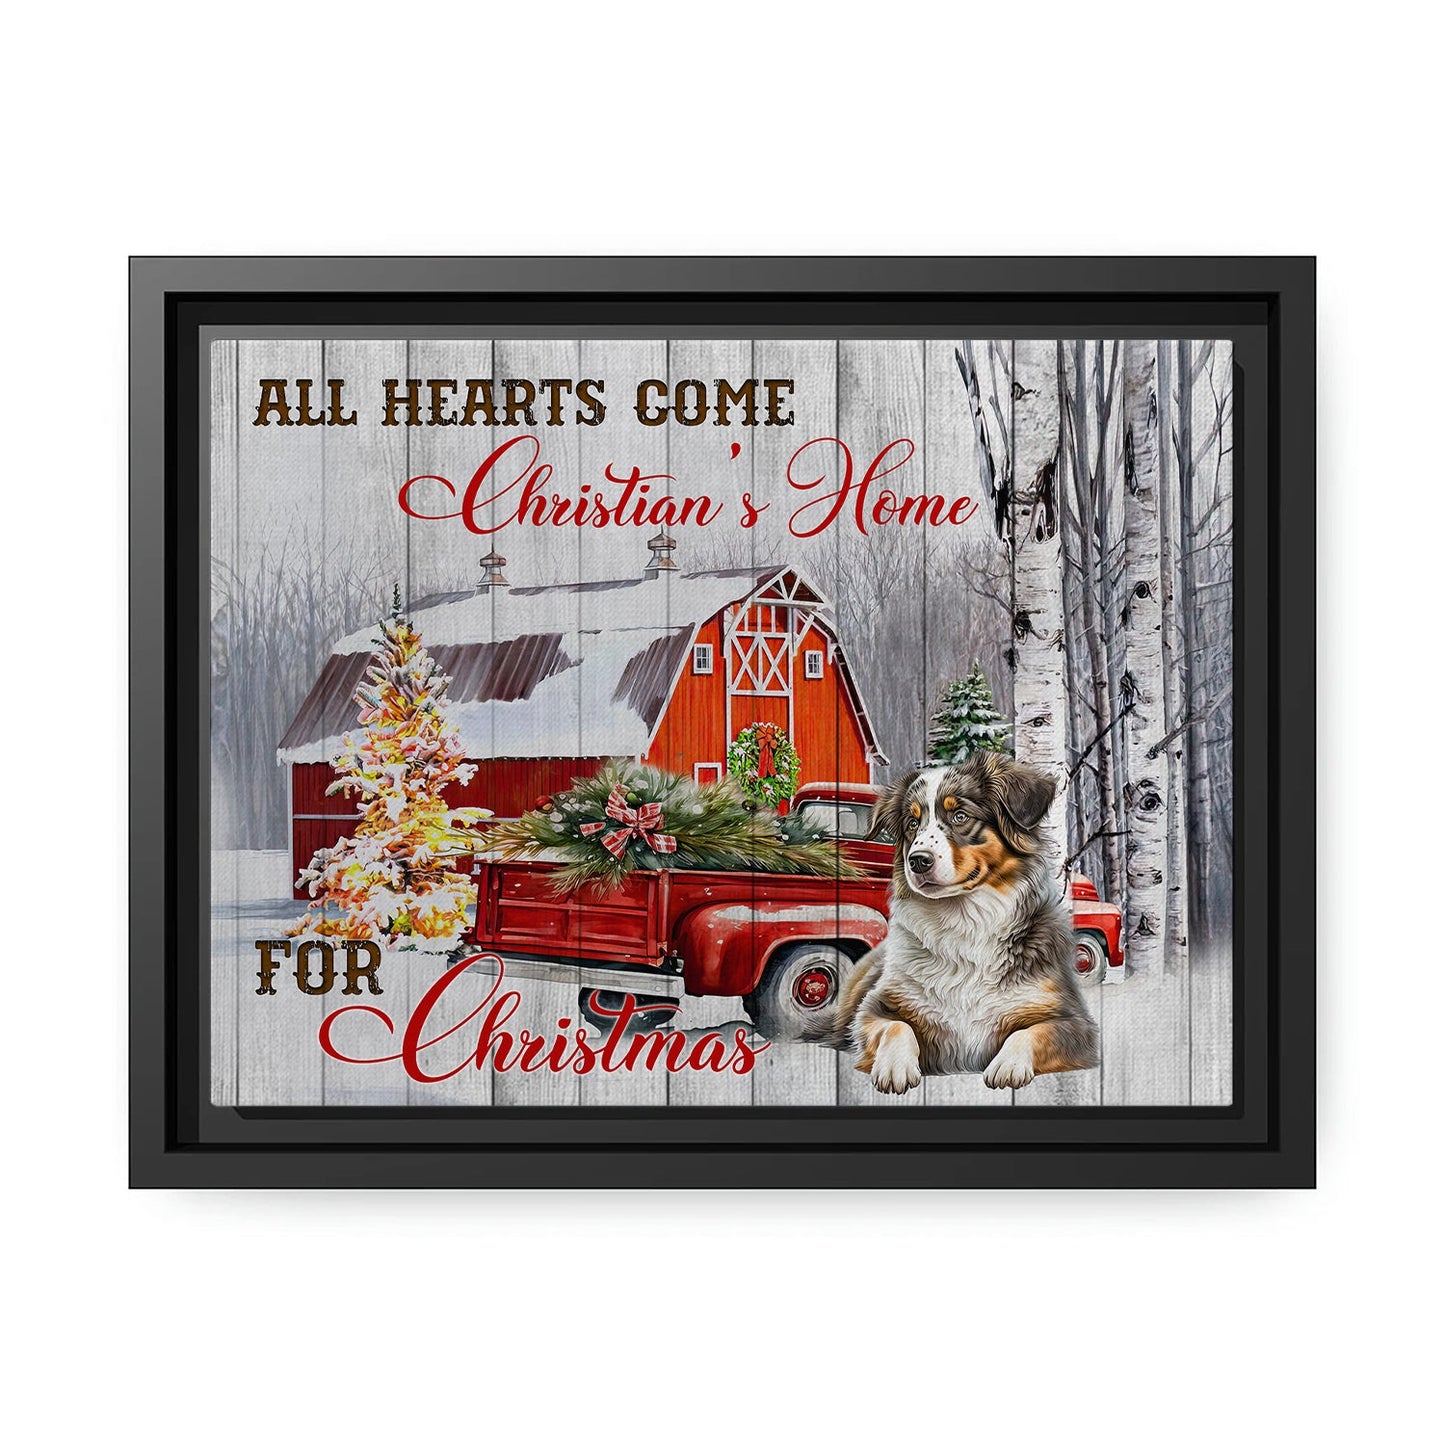 All Hearts Come Home for Christmas - Personalized Christmas gift for Family - Custom Canvas Print - MyMindfulGifts